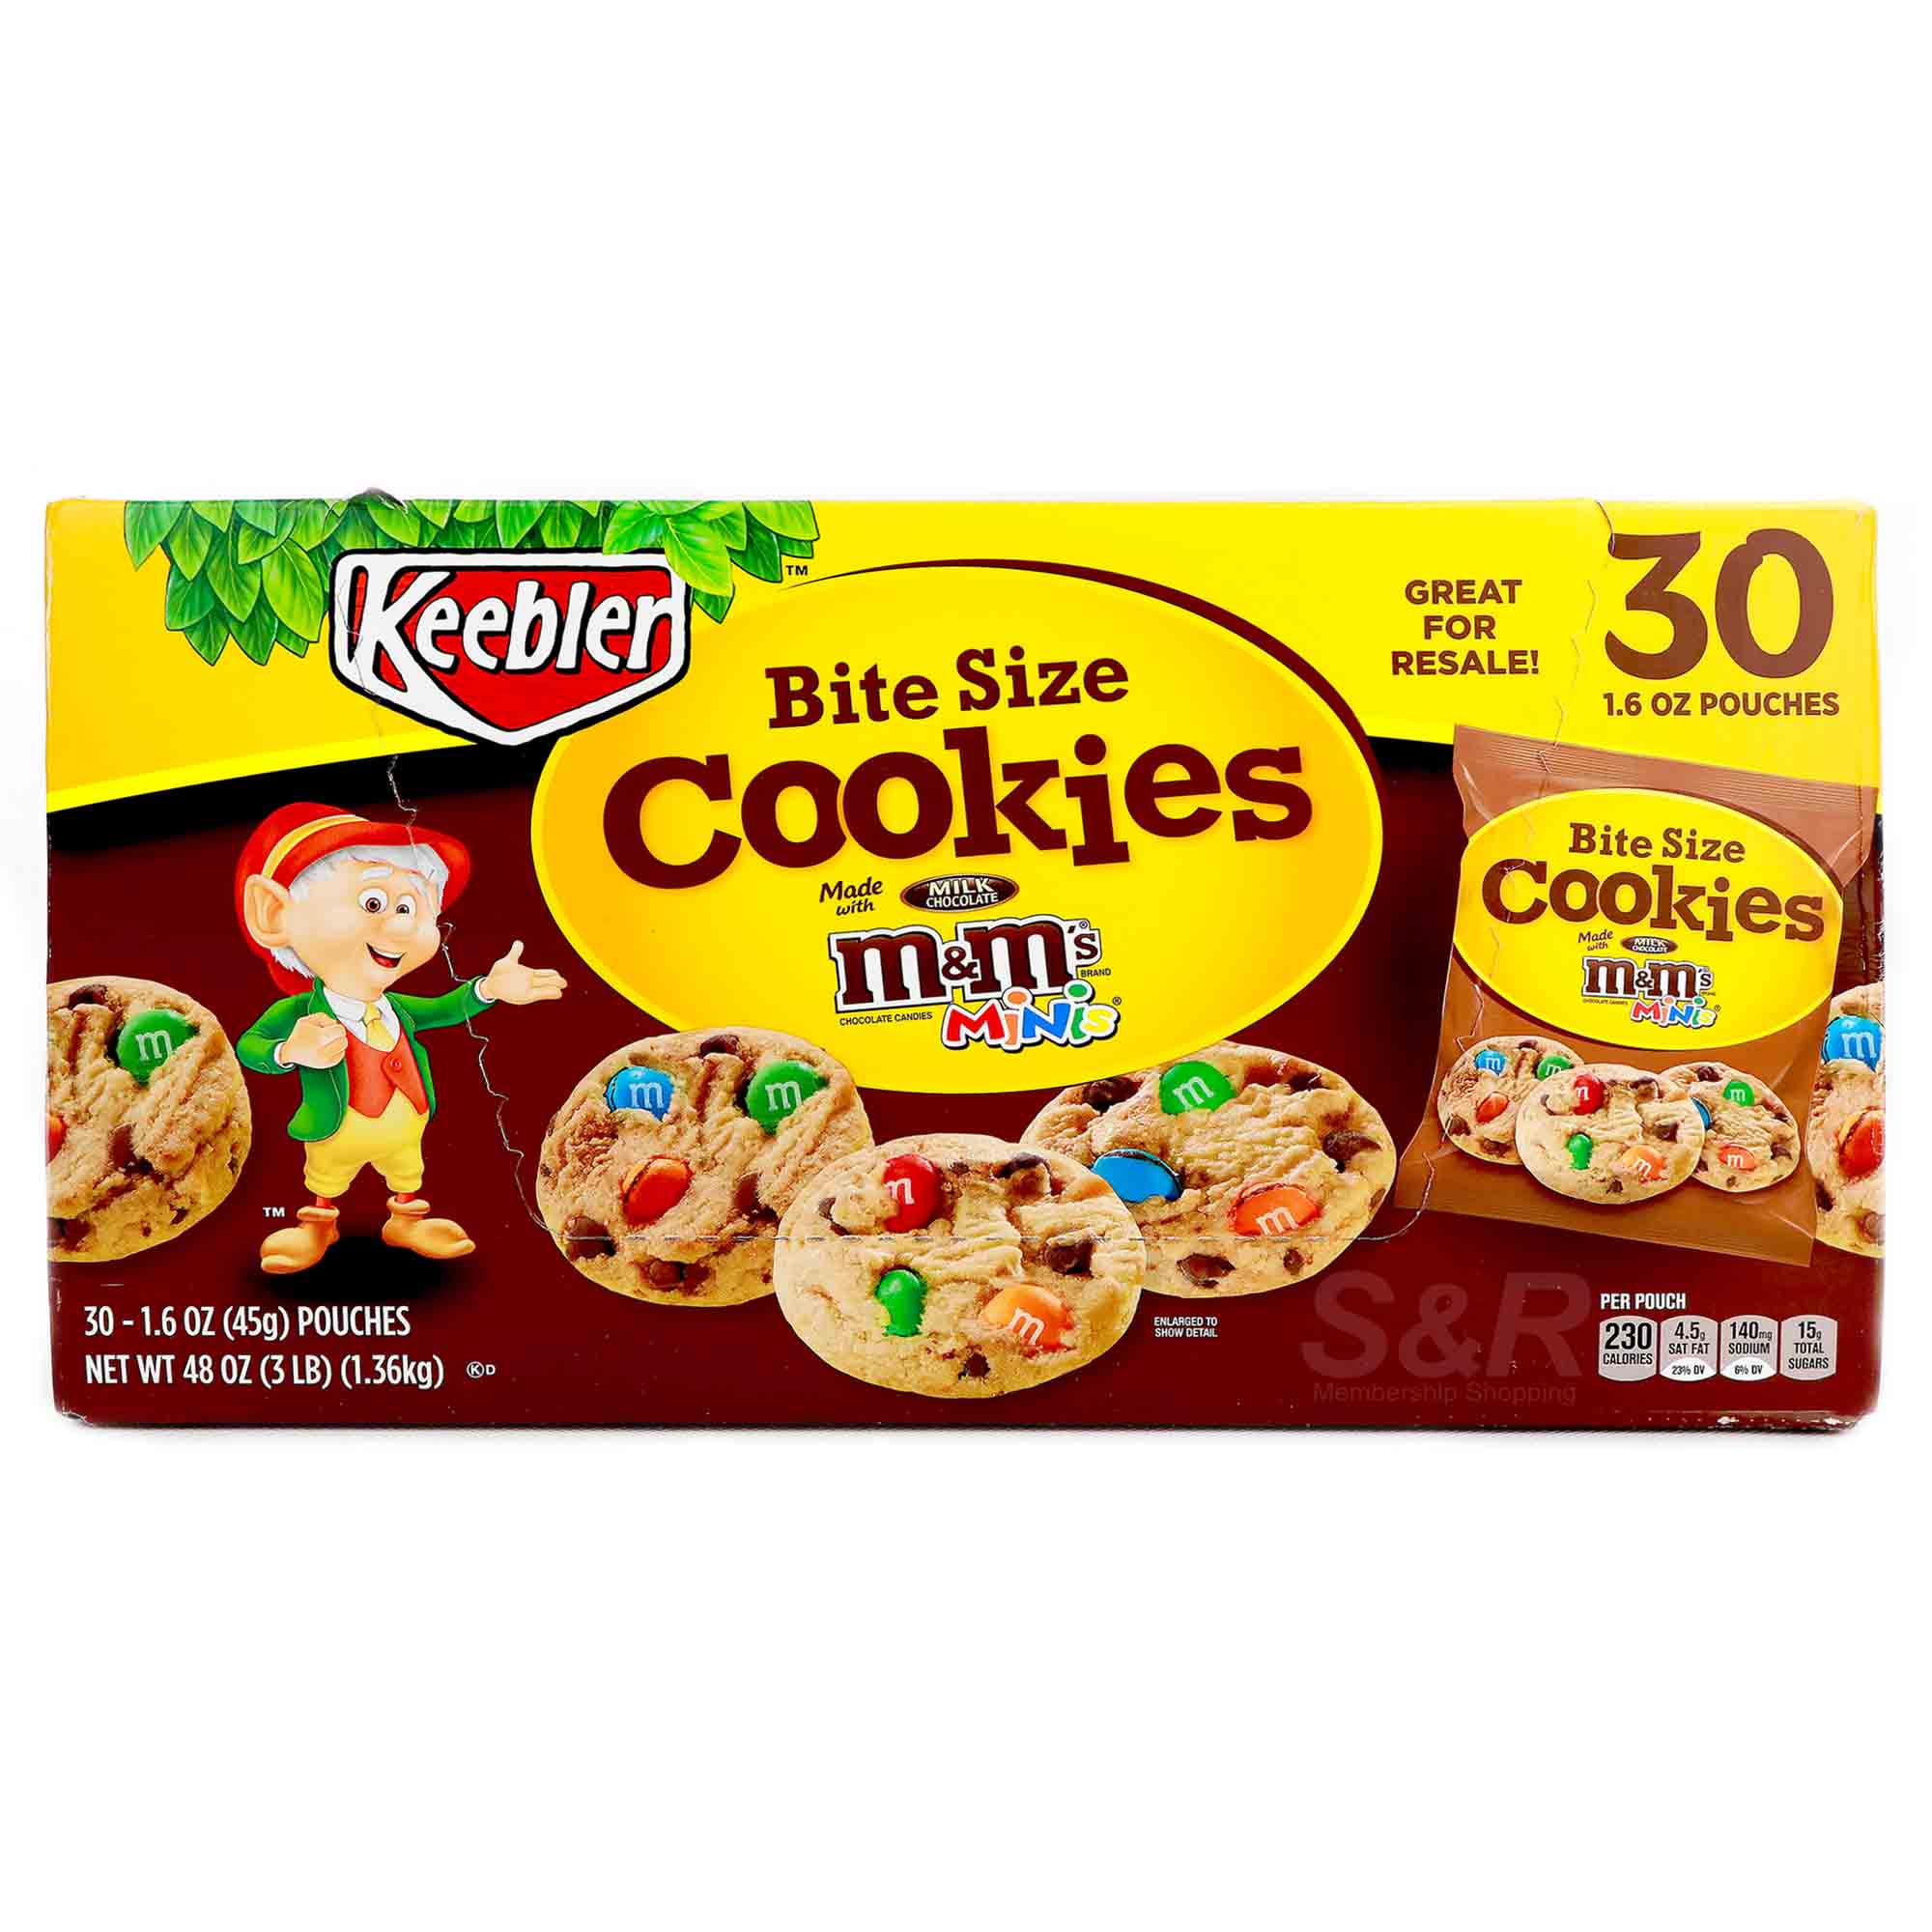 Keebler Bite Size Cookies Made with Milk Chocolate M&M’s 1.36kg